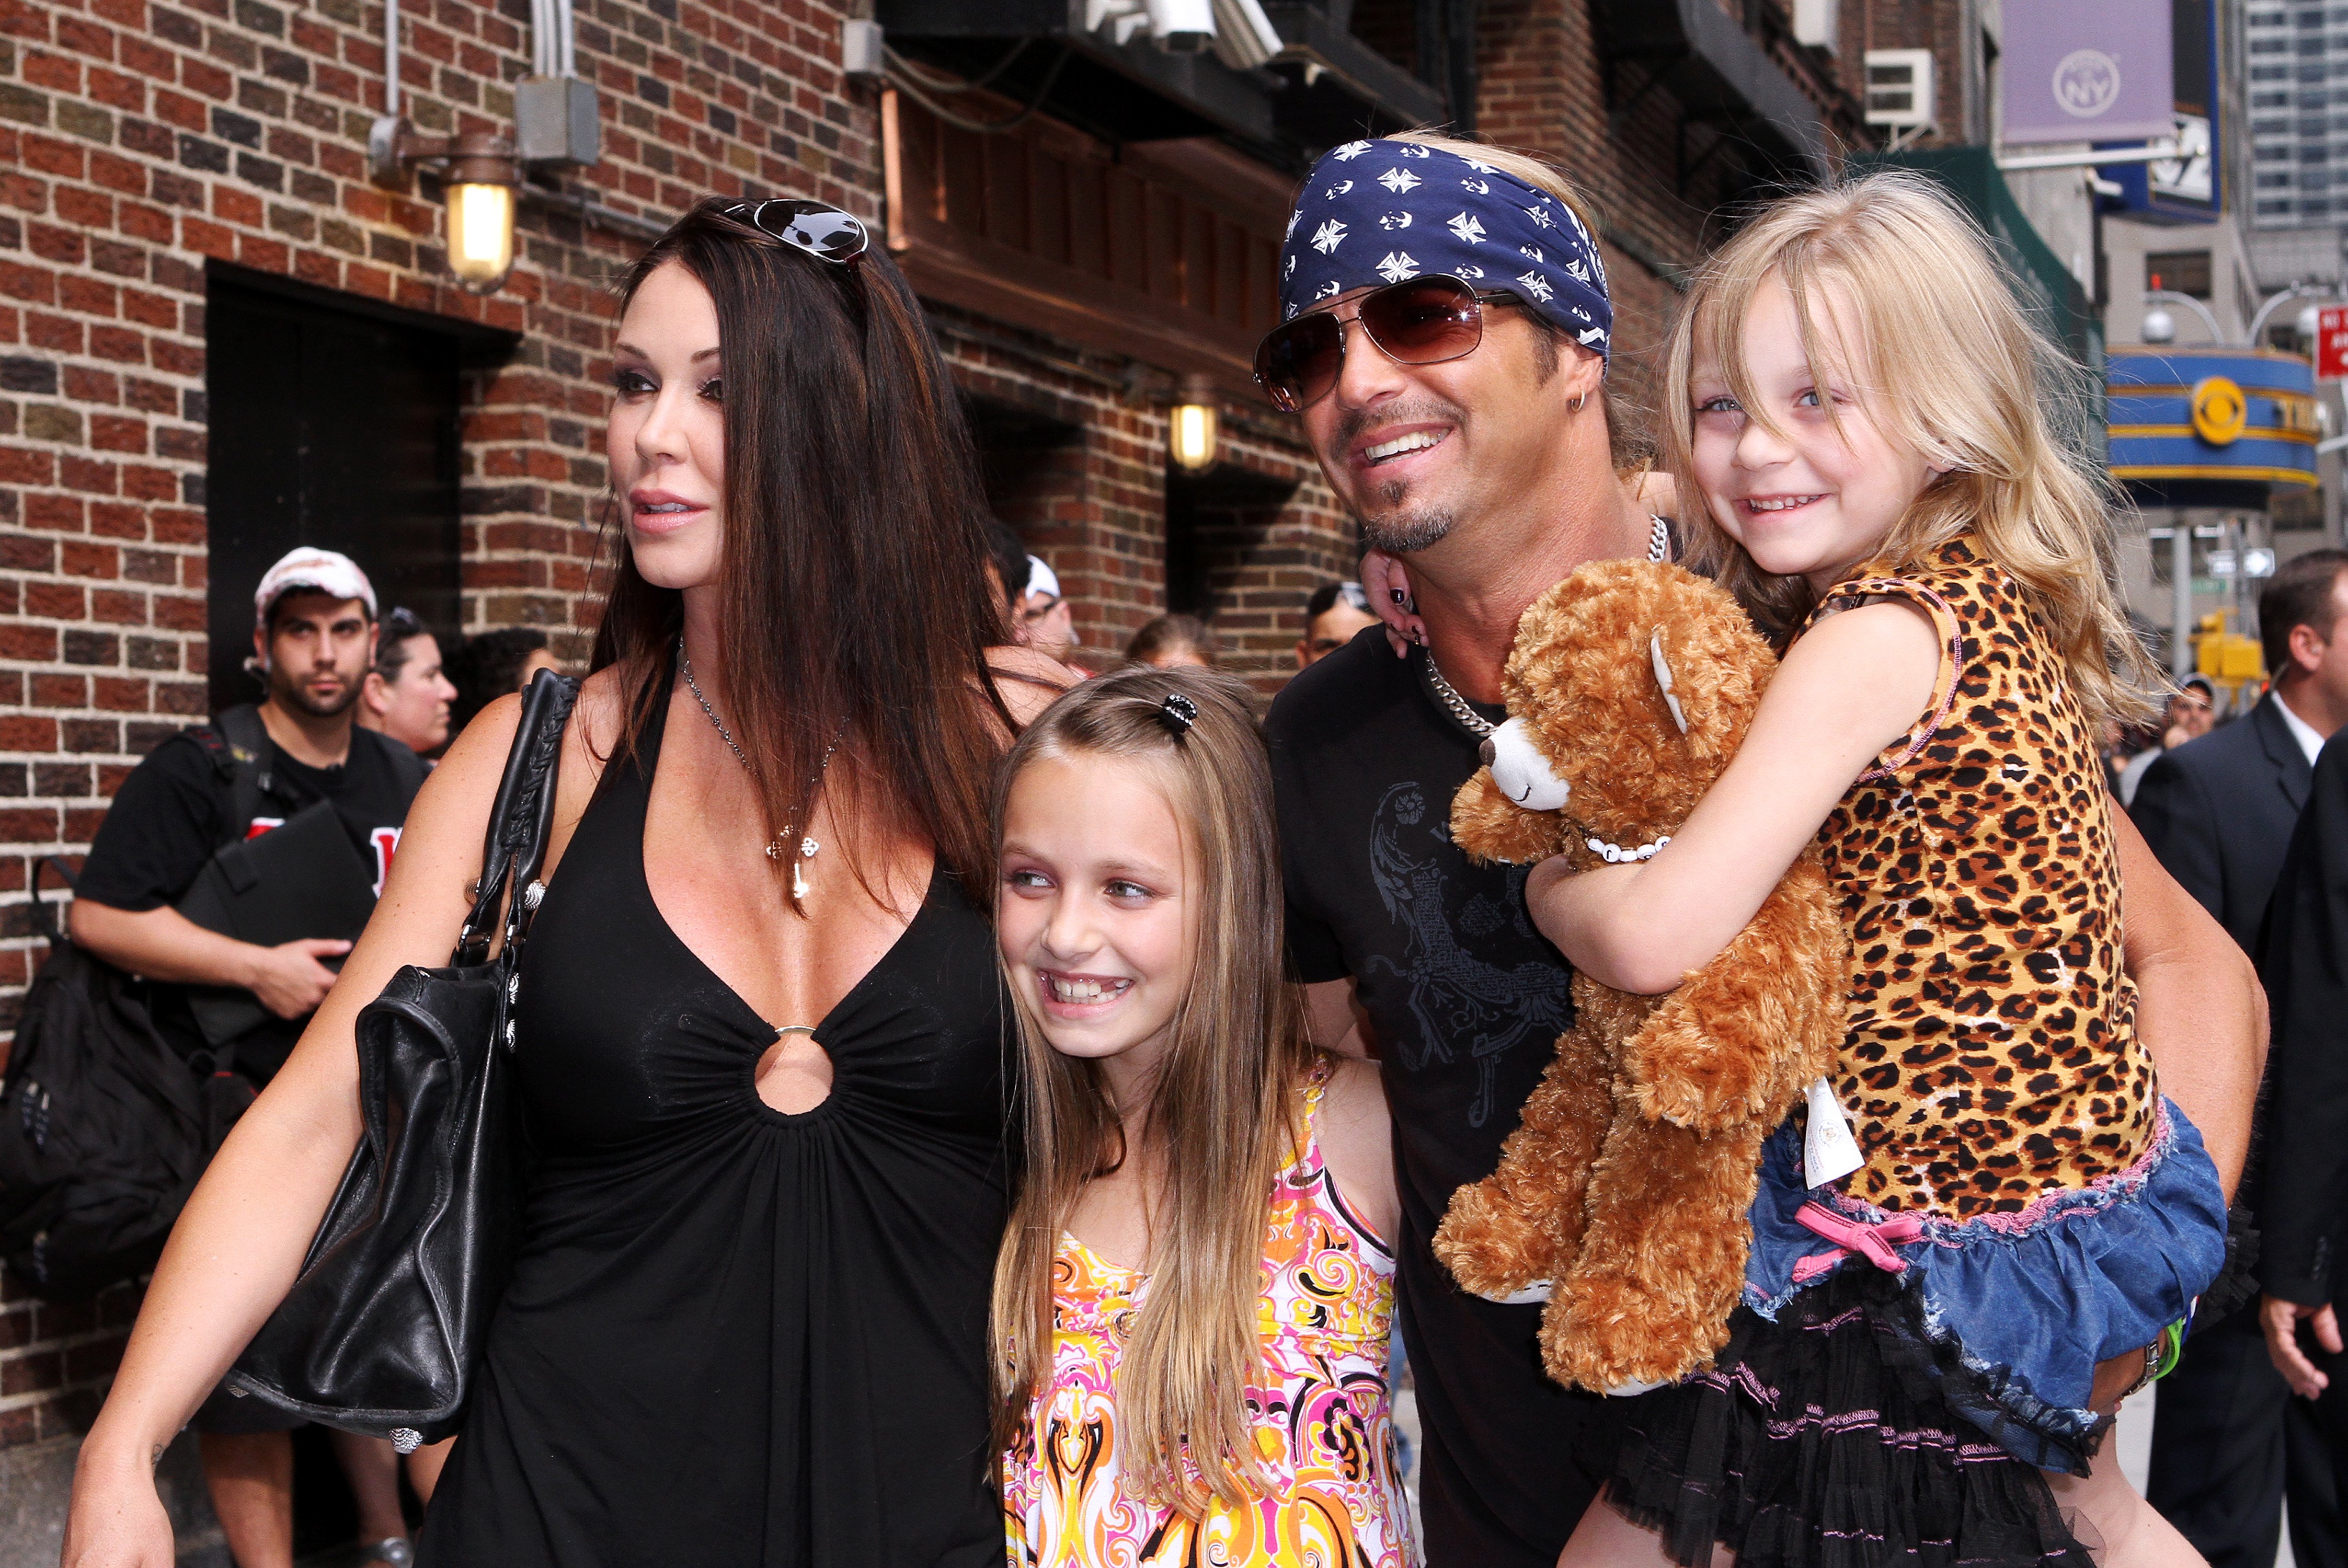 Kristi Lynn Gibson, Raine Elizabeth Sychak, Bret Michaels, and Jorja Bleu Sychak at the "Late Show With David Letterman" on July 12, 2010 | Source: Getty Images